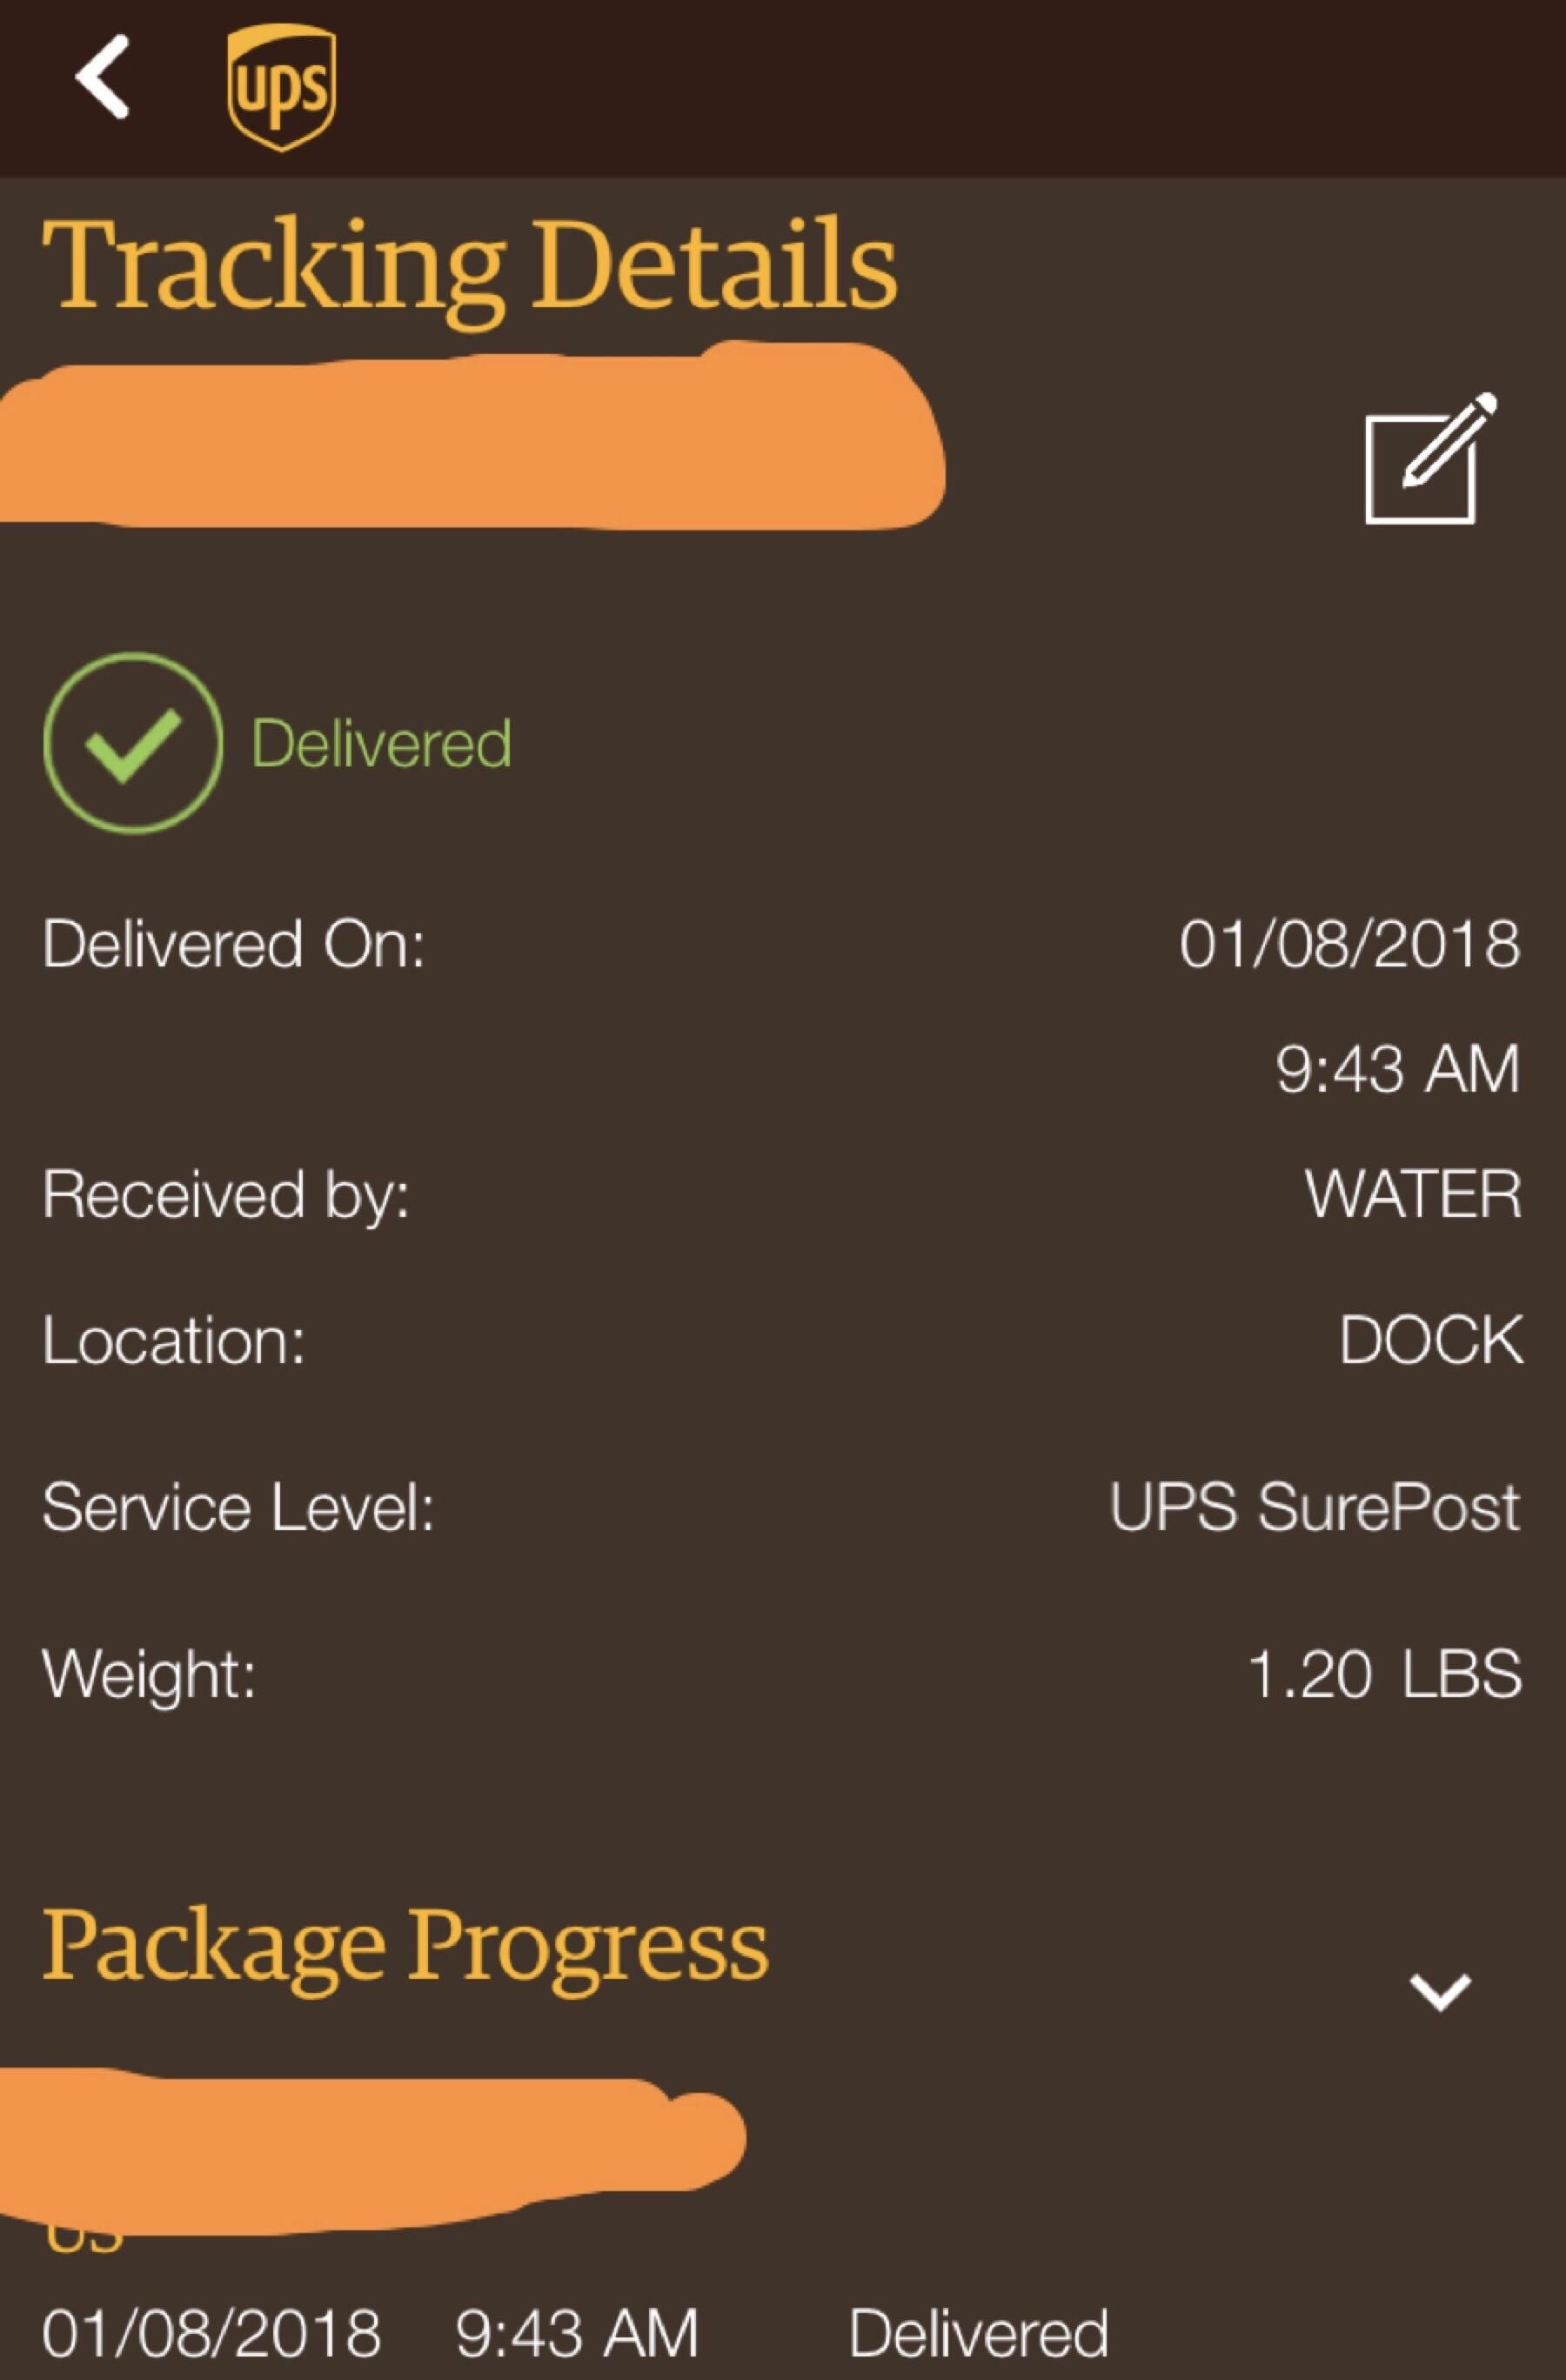 tracking package meme - Tracking Details Delivered Delivered Delivered On 01082018 Received by Water Dock Location Service Level Ups SurePost Weight 1.20 Lbs Package Progress 01082018 Delivered